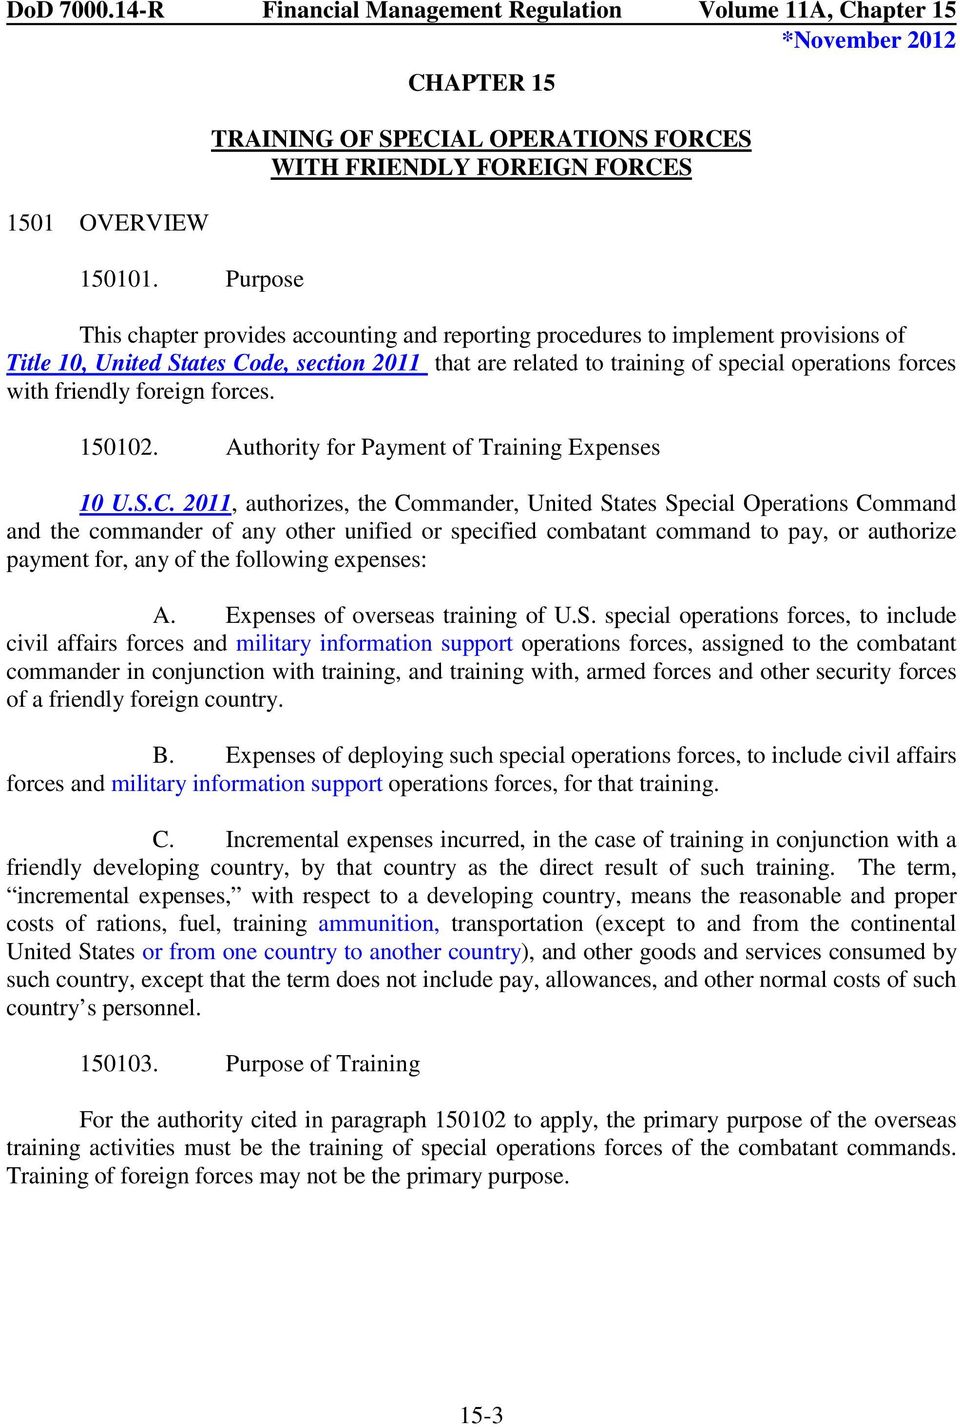 Code, section 2011 that are related to training of special operations forces with friendly foreign forces. 150102. Authority for Payment of Training Expenses 10 U.S.C. 2011, authorizes, the